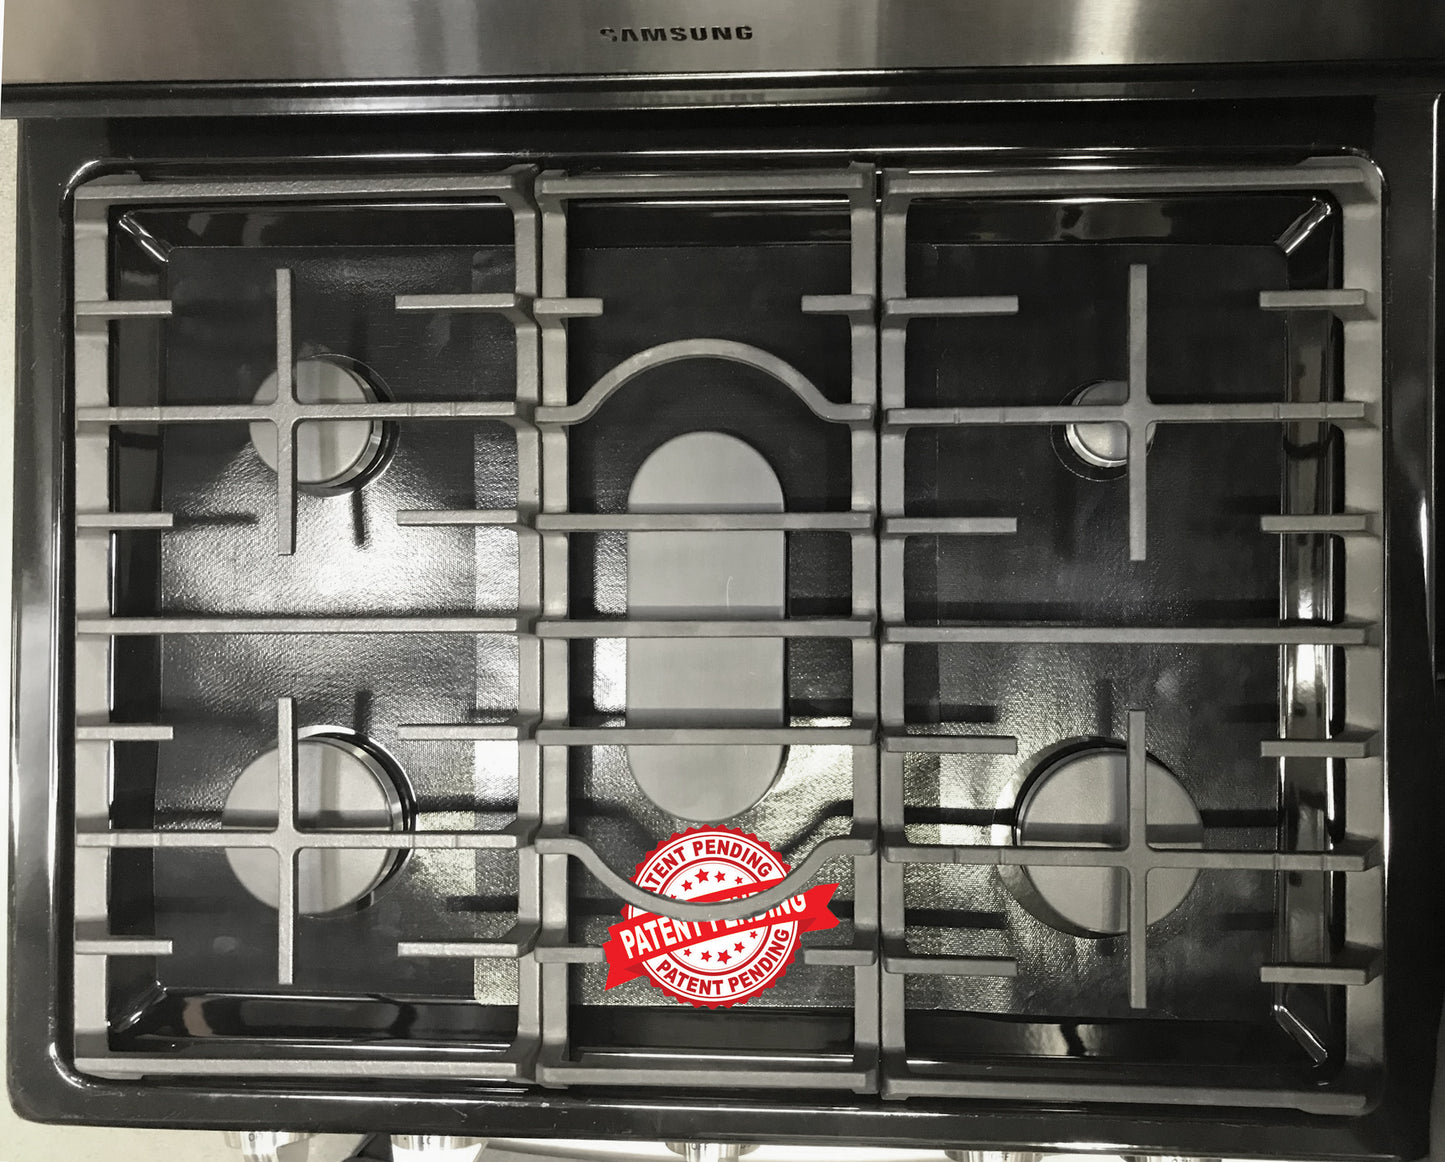 Samsung Stove Protector Liners - Stove Top Protector for Samsung Gas ranges - Customized - Easy Cleaning Stove Liners